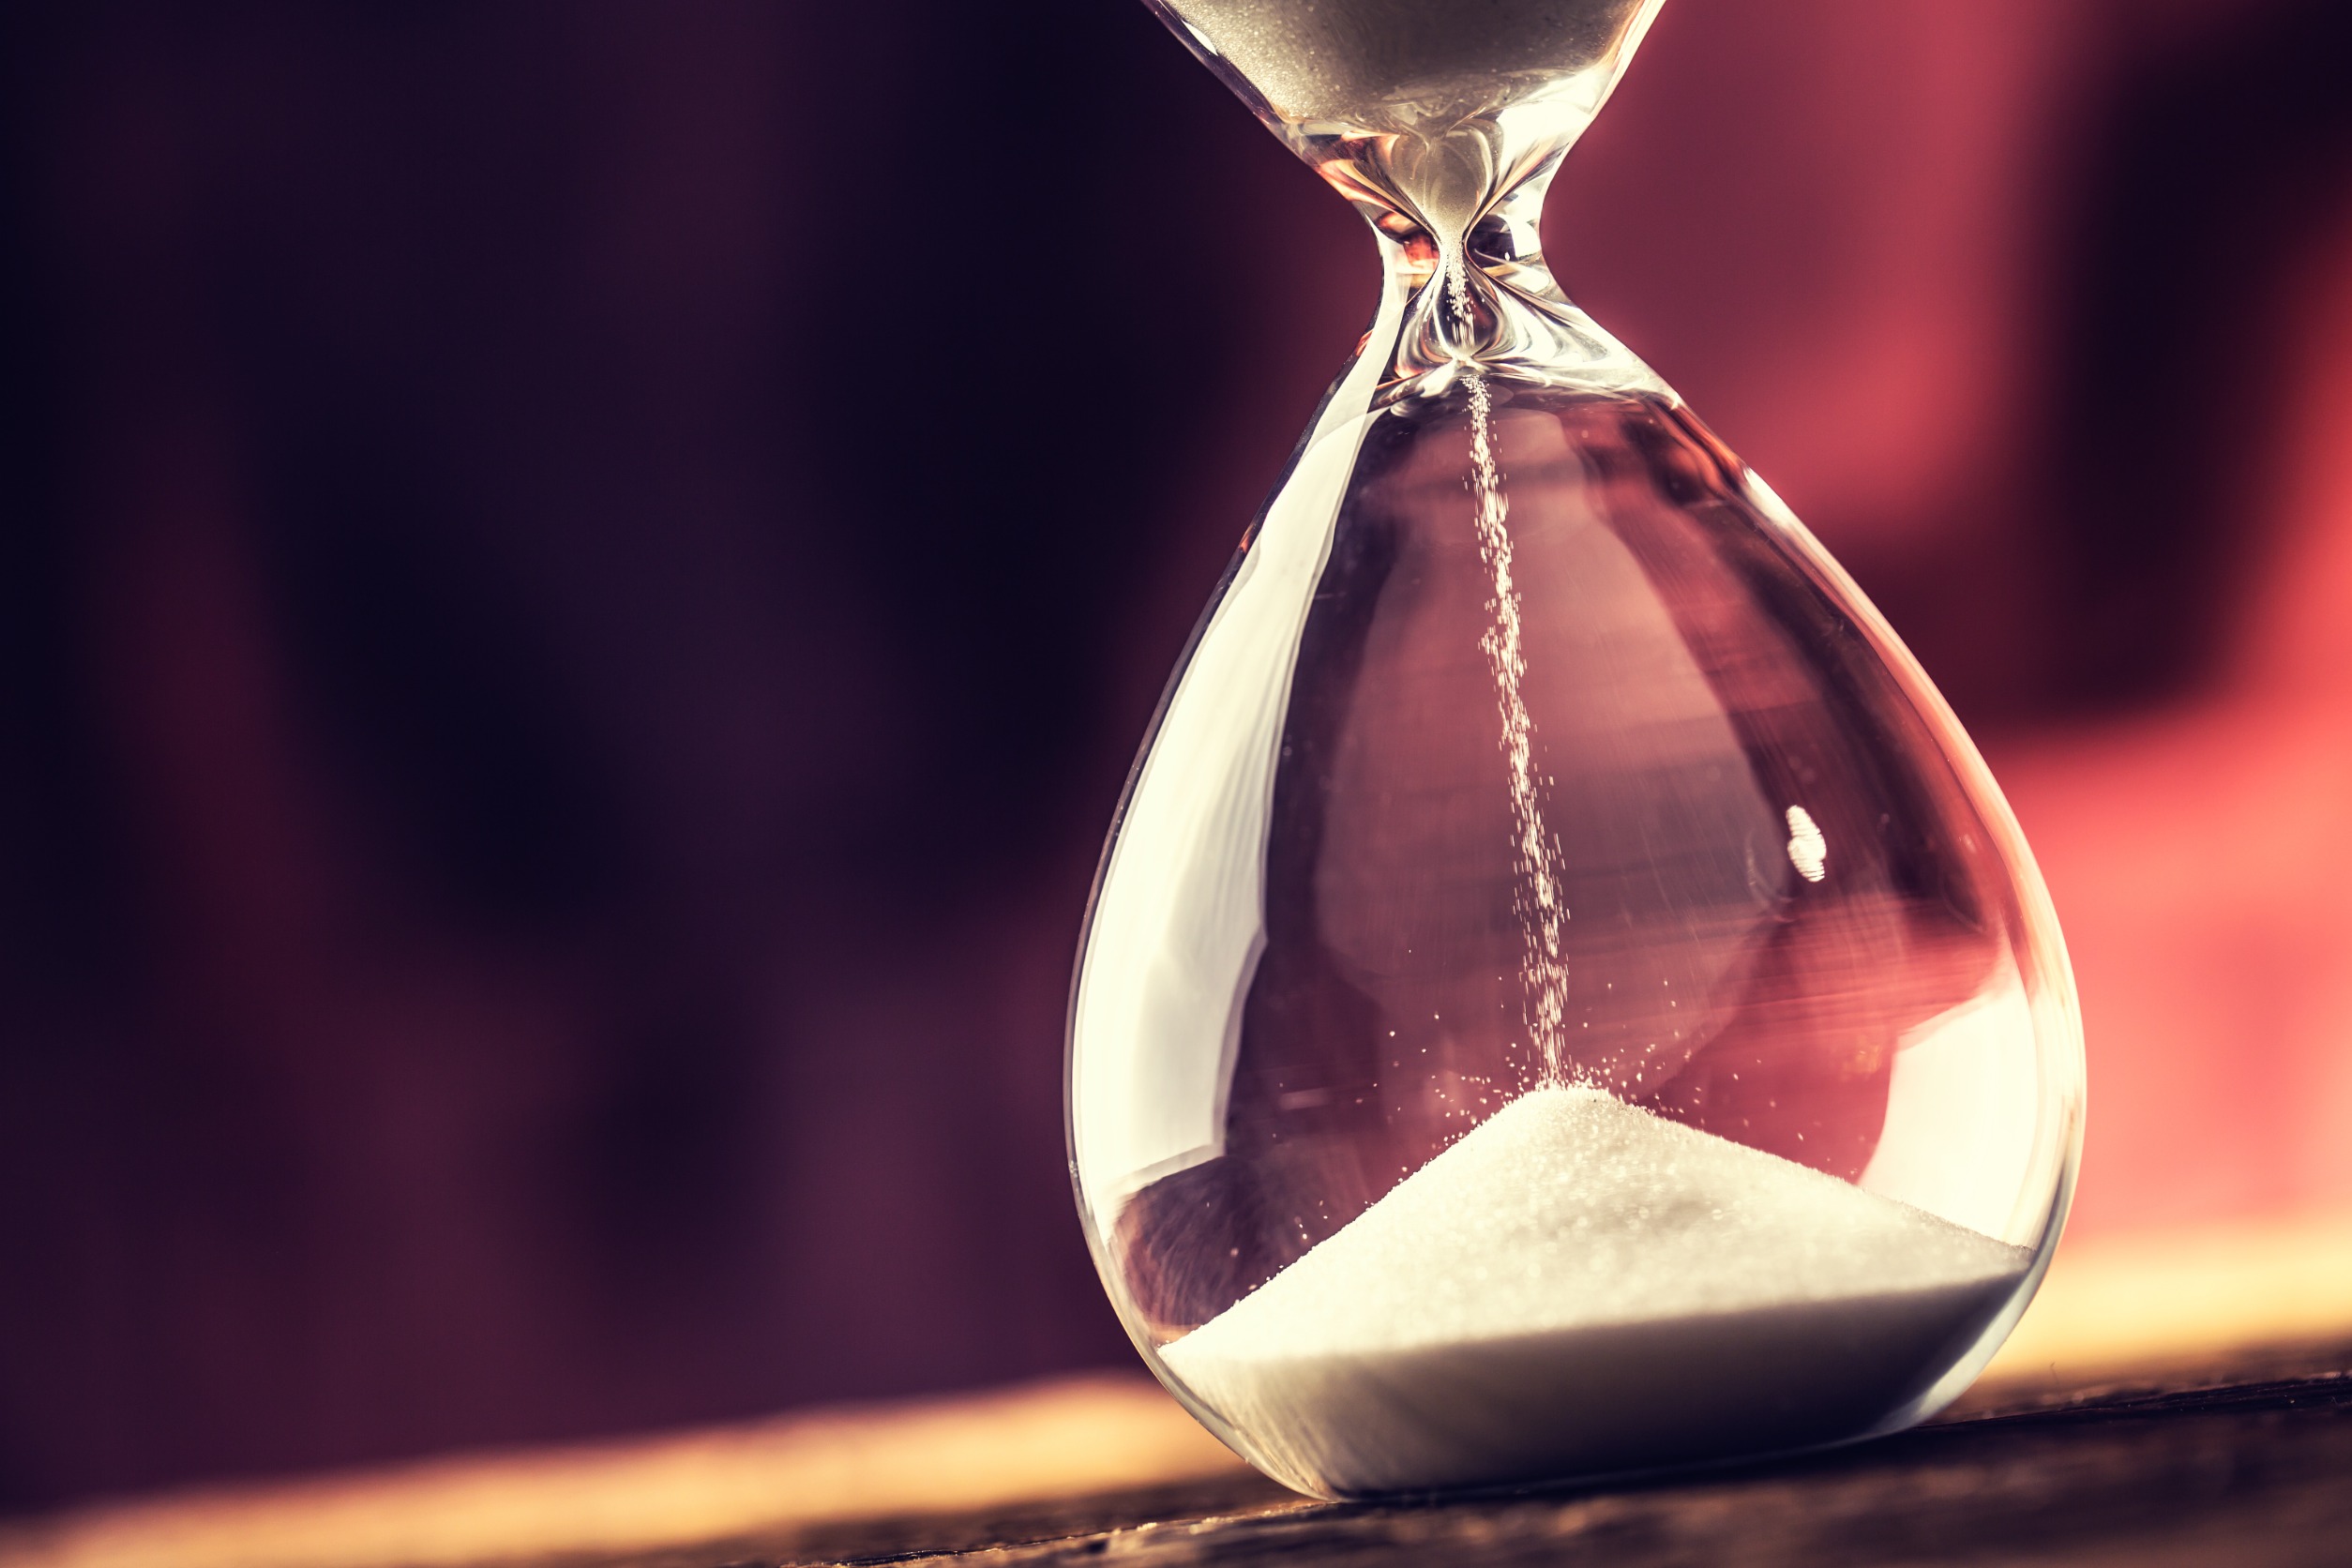 <p>As the end approaches, the value of time becomes increasingly apparent, often overshadowing the desire for material possessions. Investing time in experiences and relationships is infinitely more rewarding and fulfilling.</p>